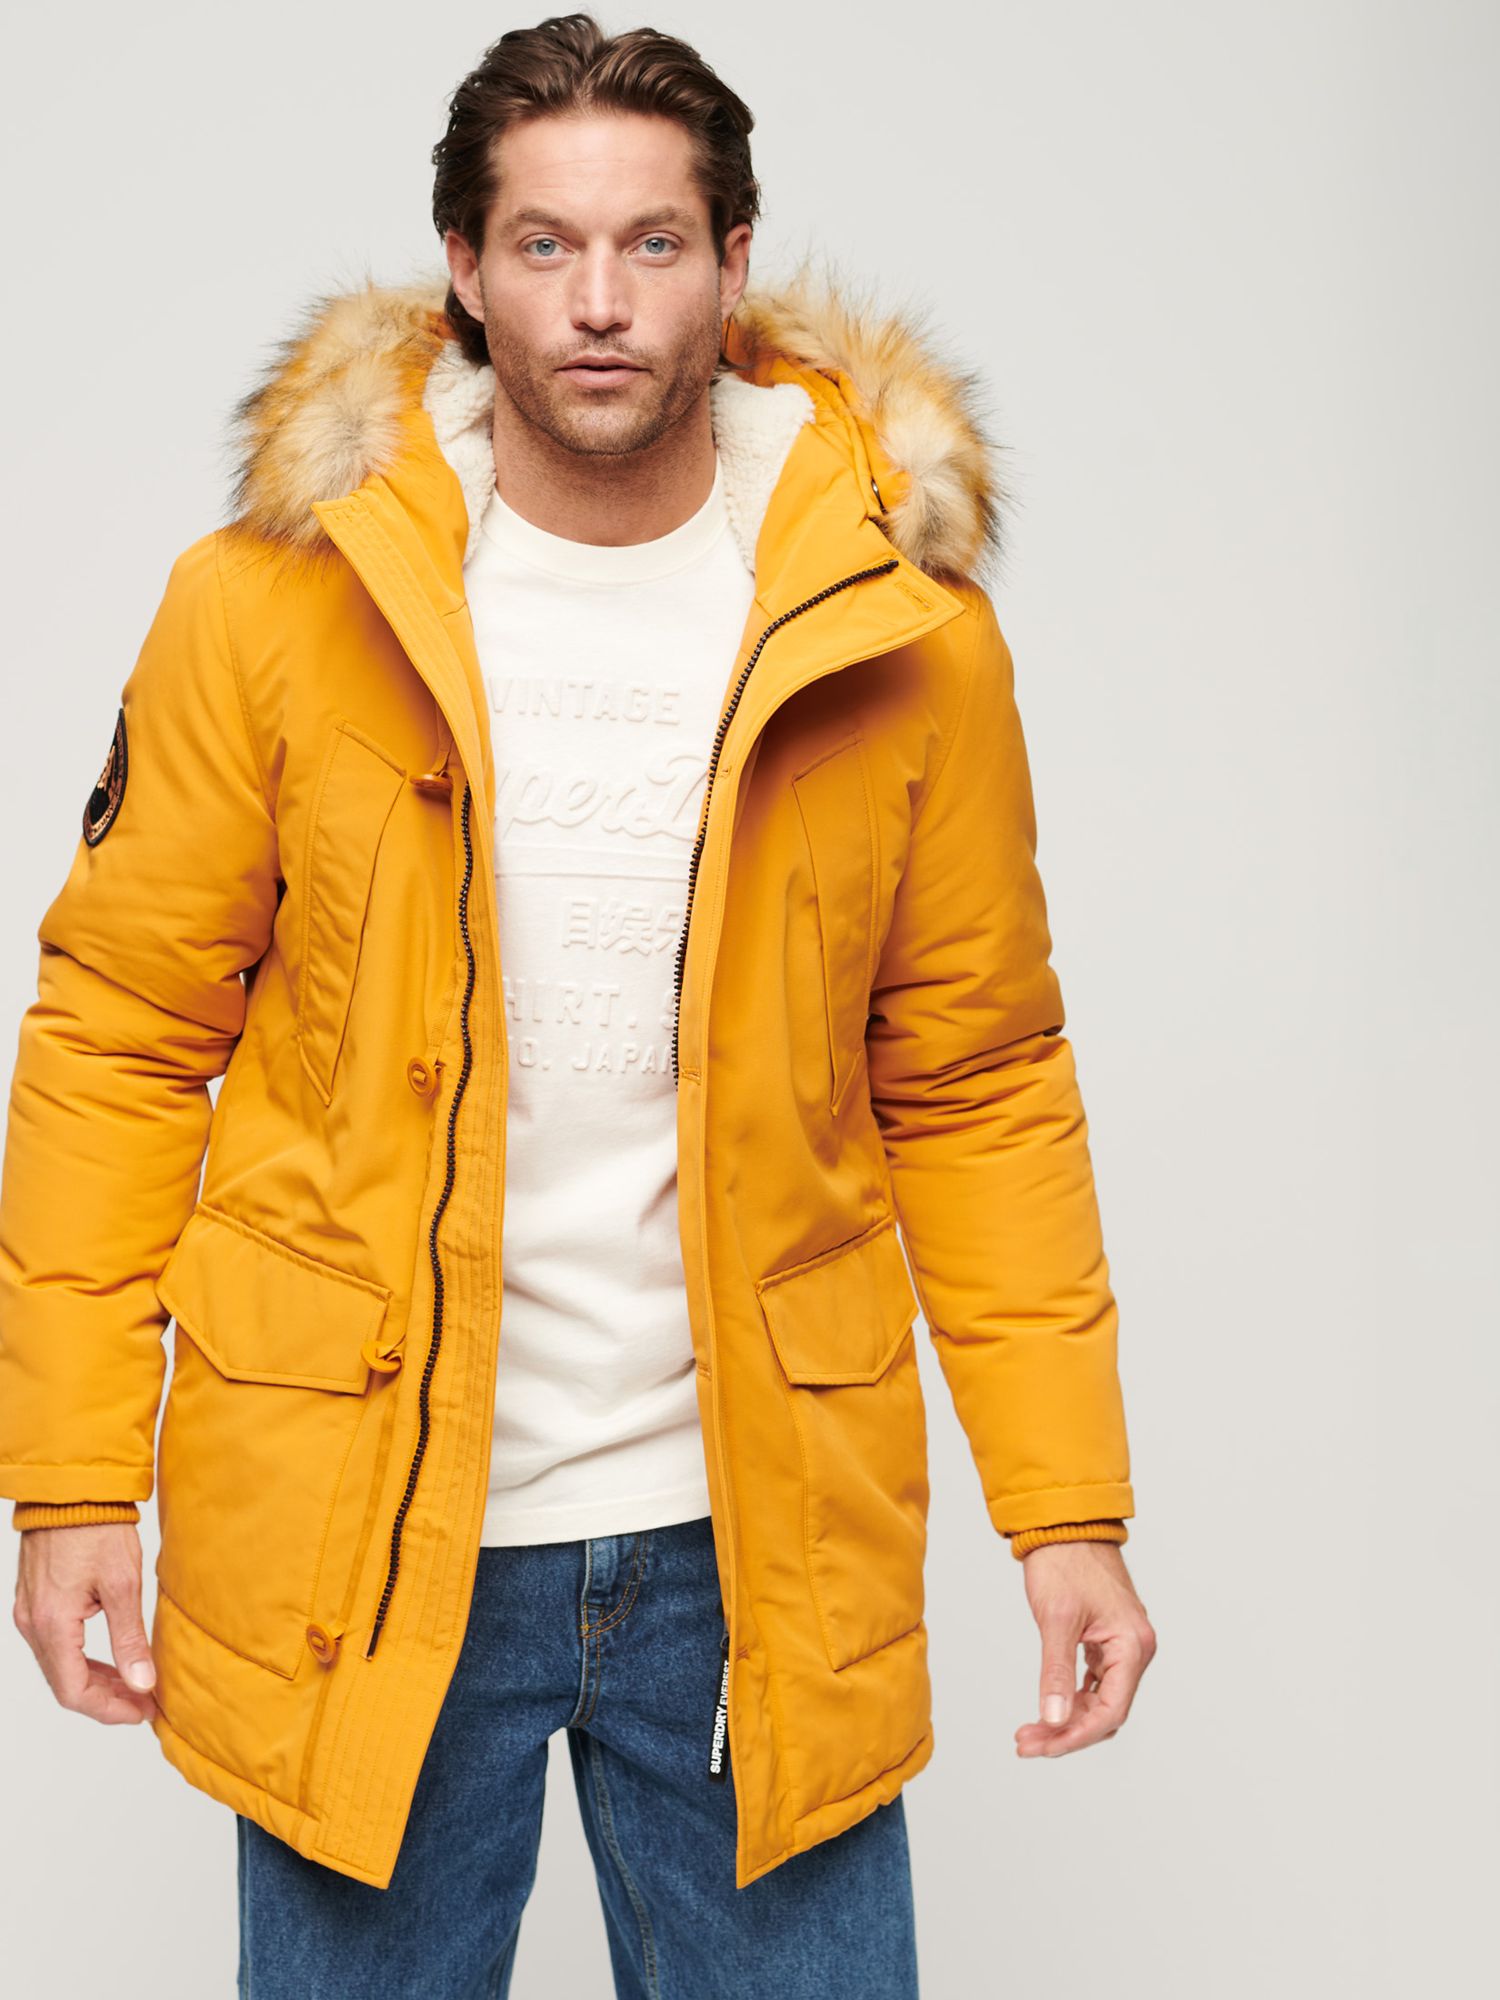 Superdry Everest Faux Fur Hooded Parka Coat, Mustard Yellow, XL